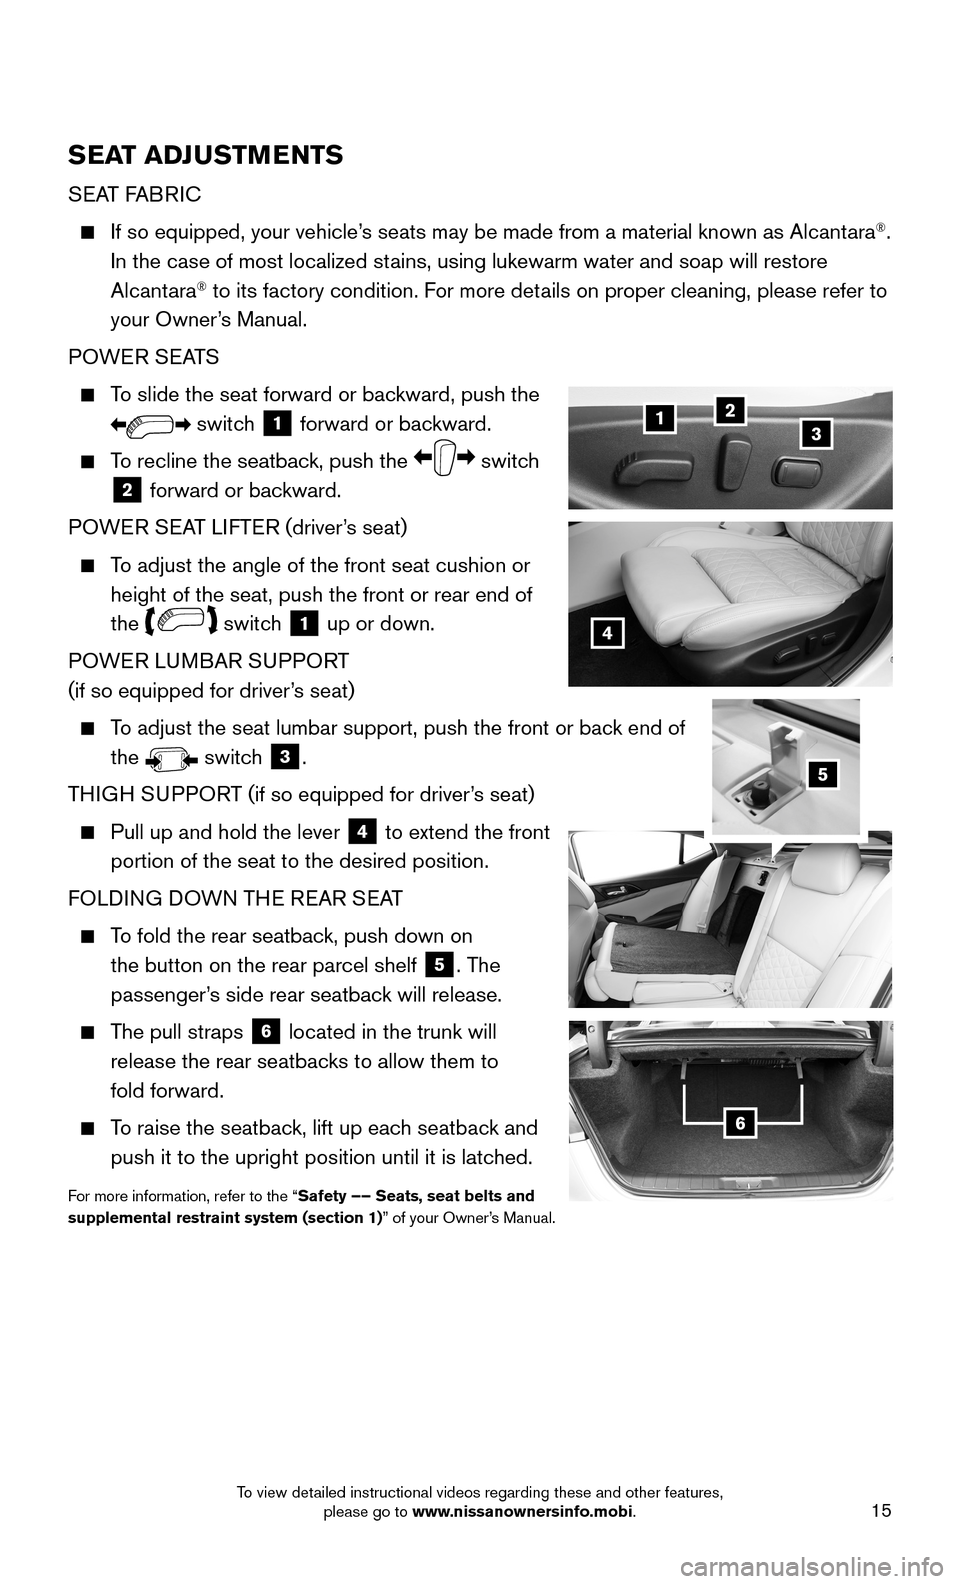 NISSAN MAXIMA 2016 A36 / 8.G Quick Reference Guide 15
SEAT ADJUSTMENTS
SEAT FABRIC
    If so equipped, your vehicle’s seats may be made from a material known as Alcantara®. 
In the case of most localized stains, using lukewarm water and soap will r